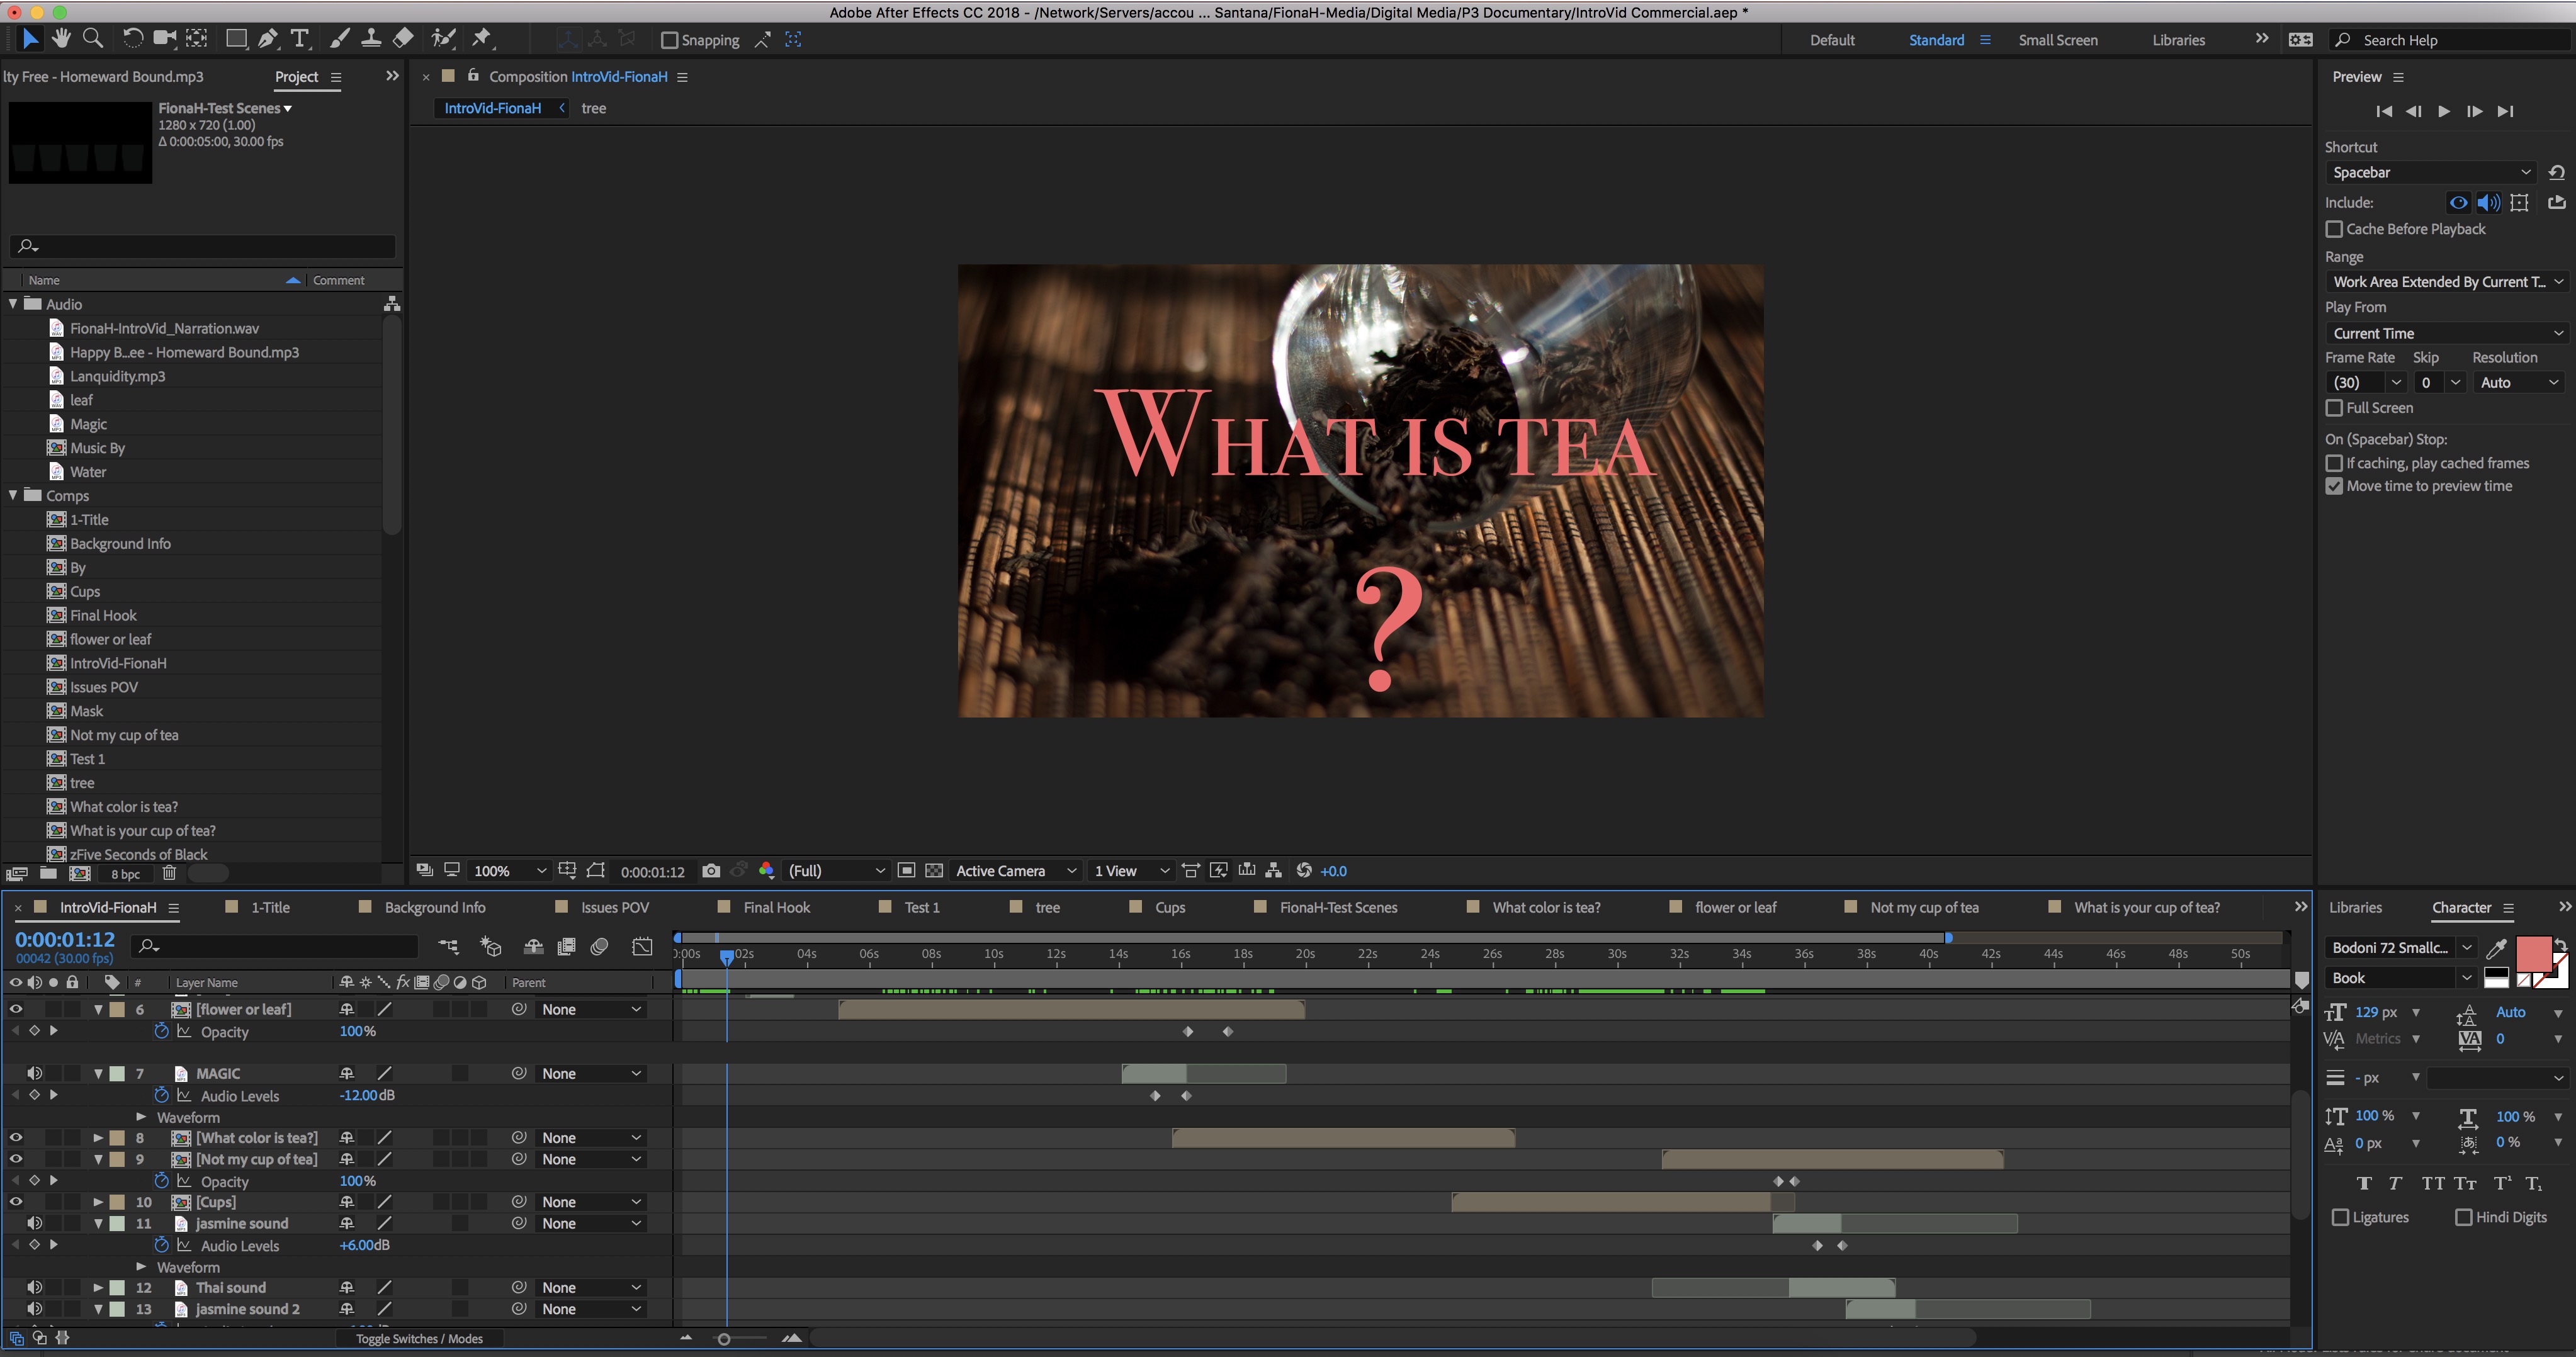 This is a screenshot of Adobe After Effects.